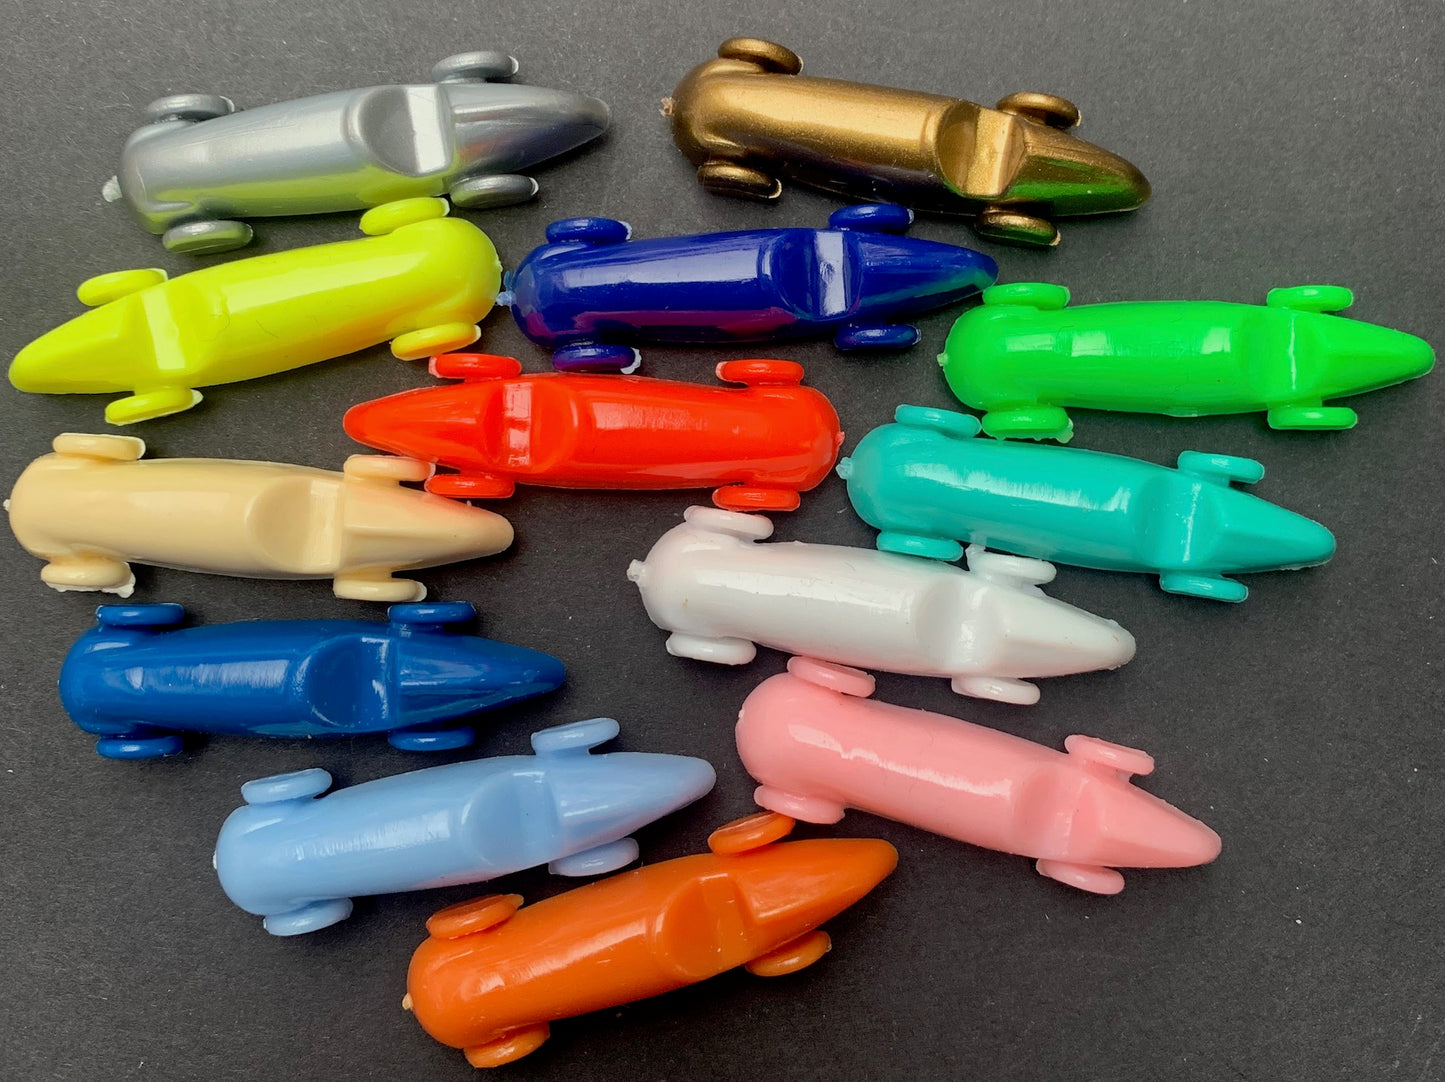 10 Colourful Vintage Racing Cars - 4cm long